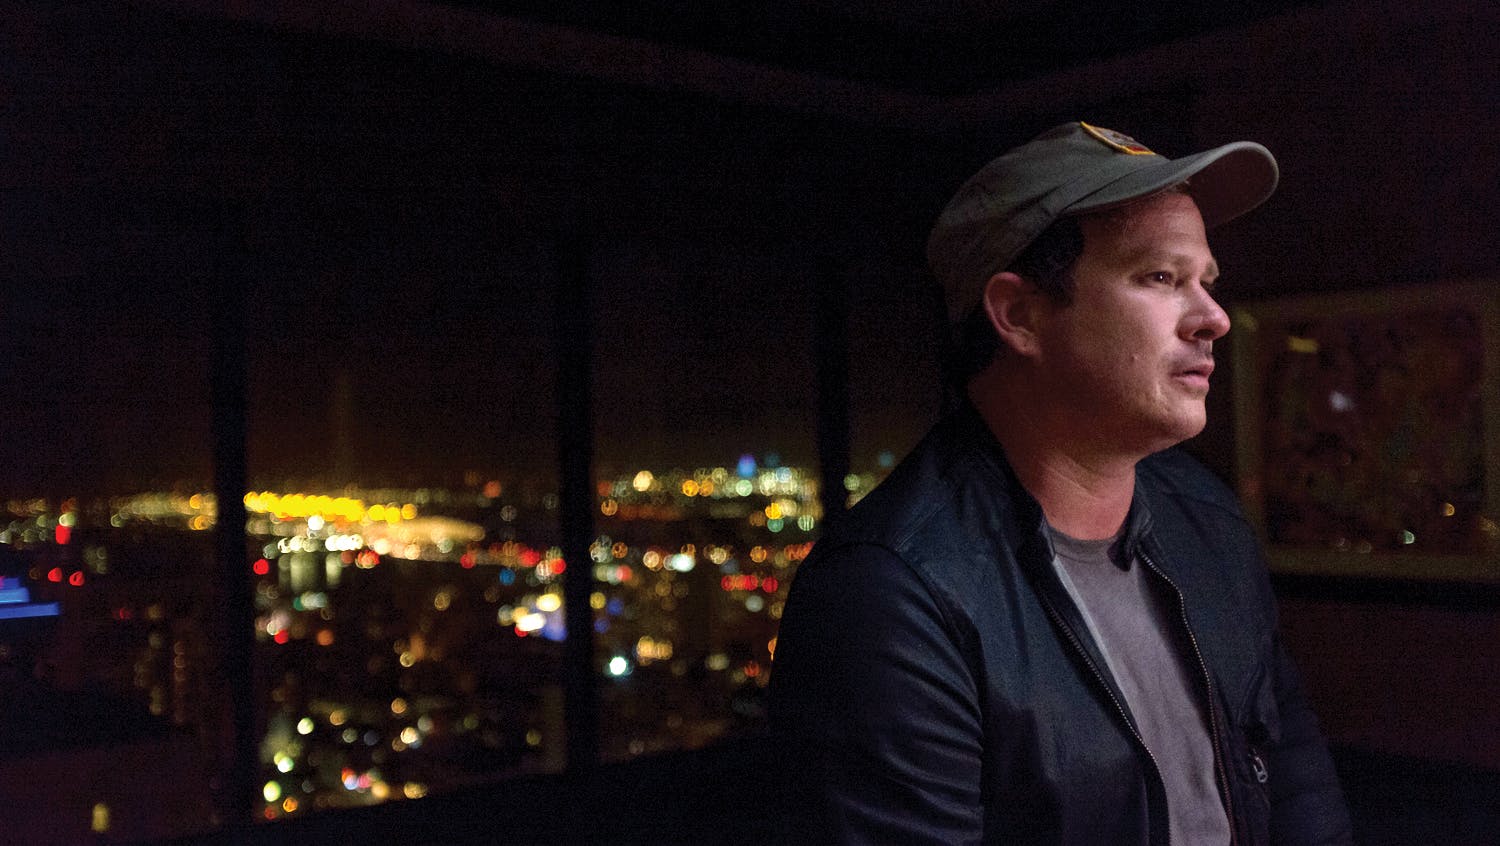 Tom DeLonge Talks UFOs, All Things Extraterrestrial And His Quest For The Truth